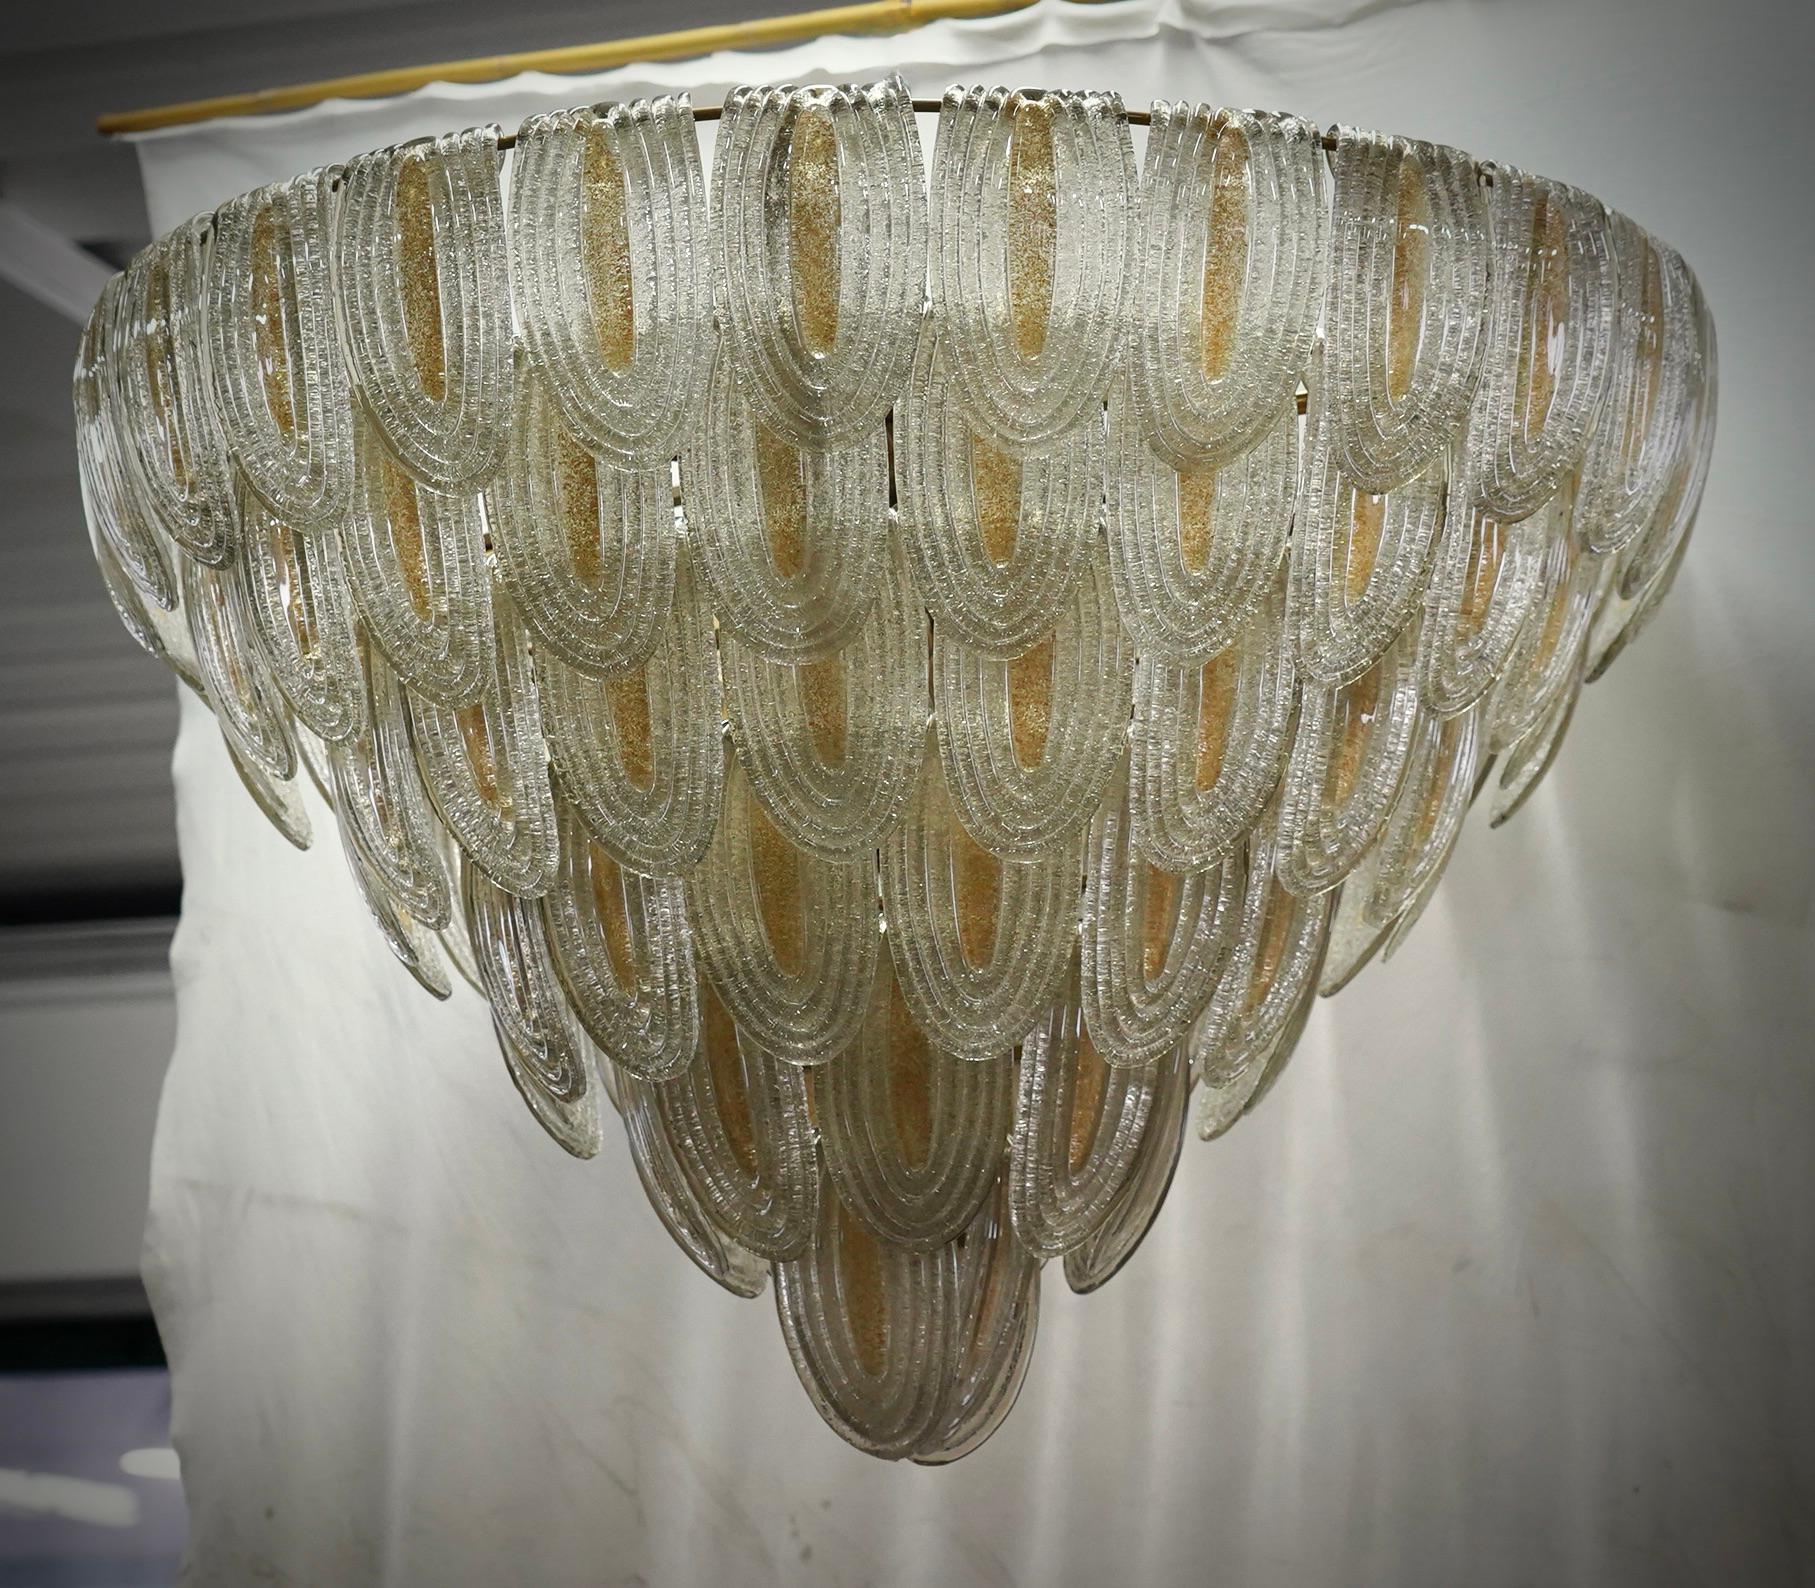 Fantastic Venetian gold and transparent color for a Cascade of Murano leaves. A striking color for this chandelier.

All in Murano art glass with gold leaves placed all around. The color of this very Classic Murano chandelier is very light gold with